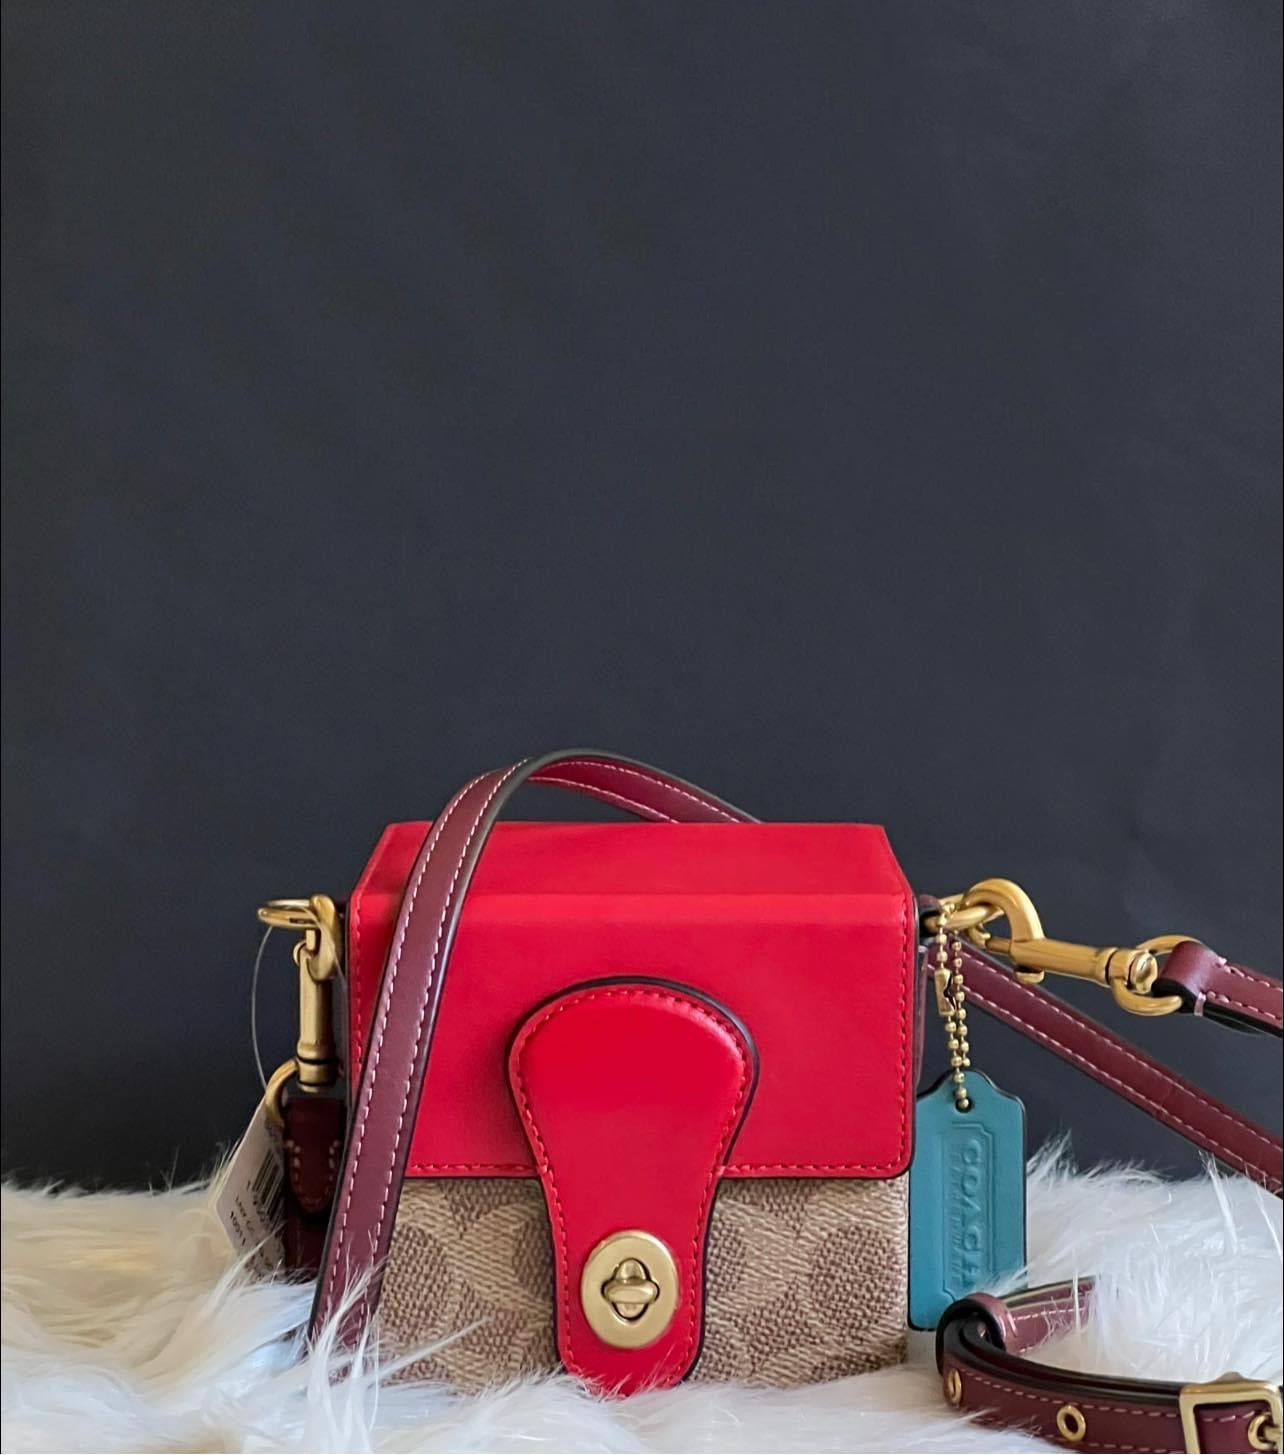 Coach Lunar New Year Square Bag 10 in Signature Canvas